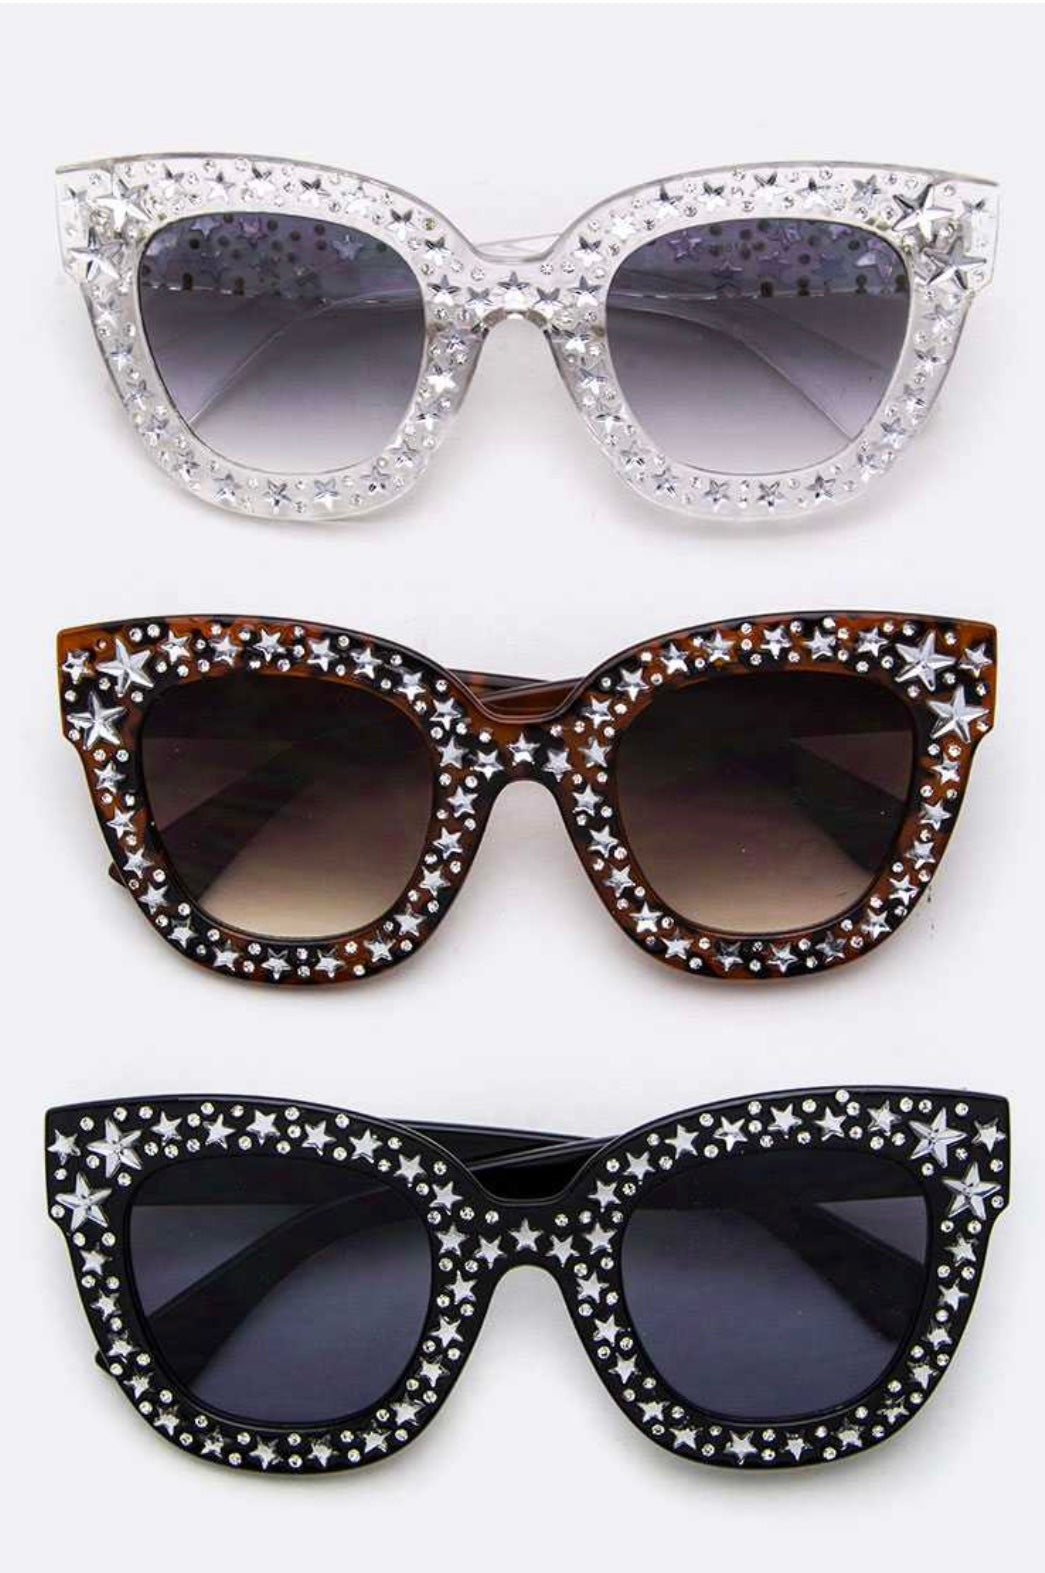 Baby, You're A Star 2.0 Sunglasses- More Styles Available!